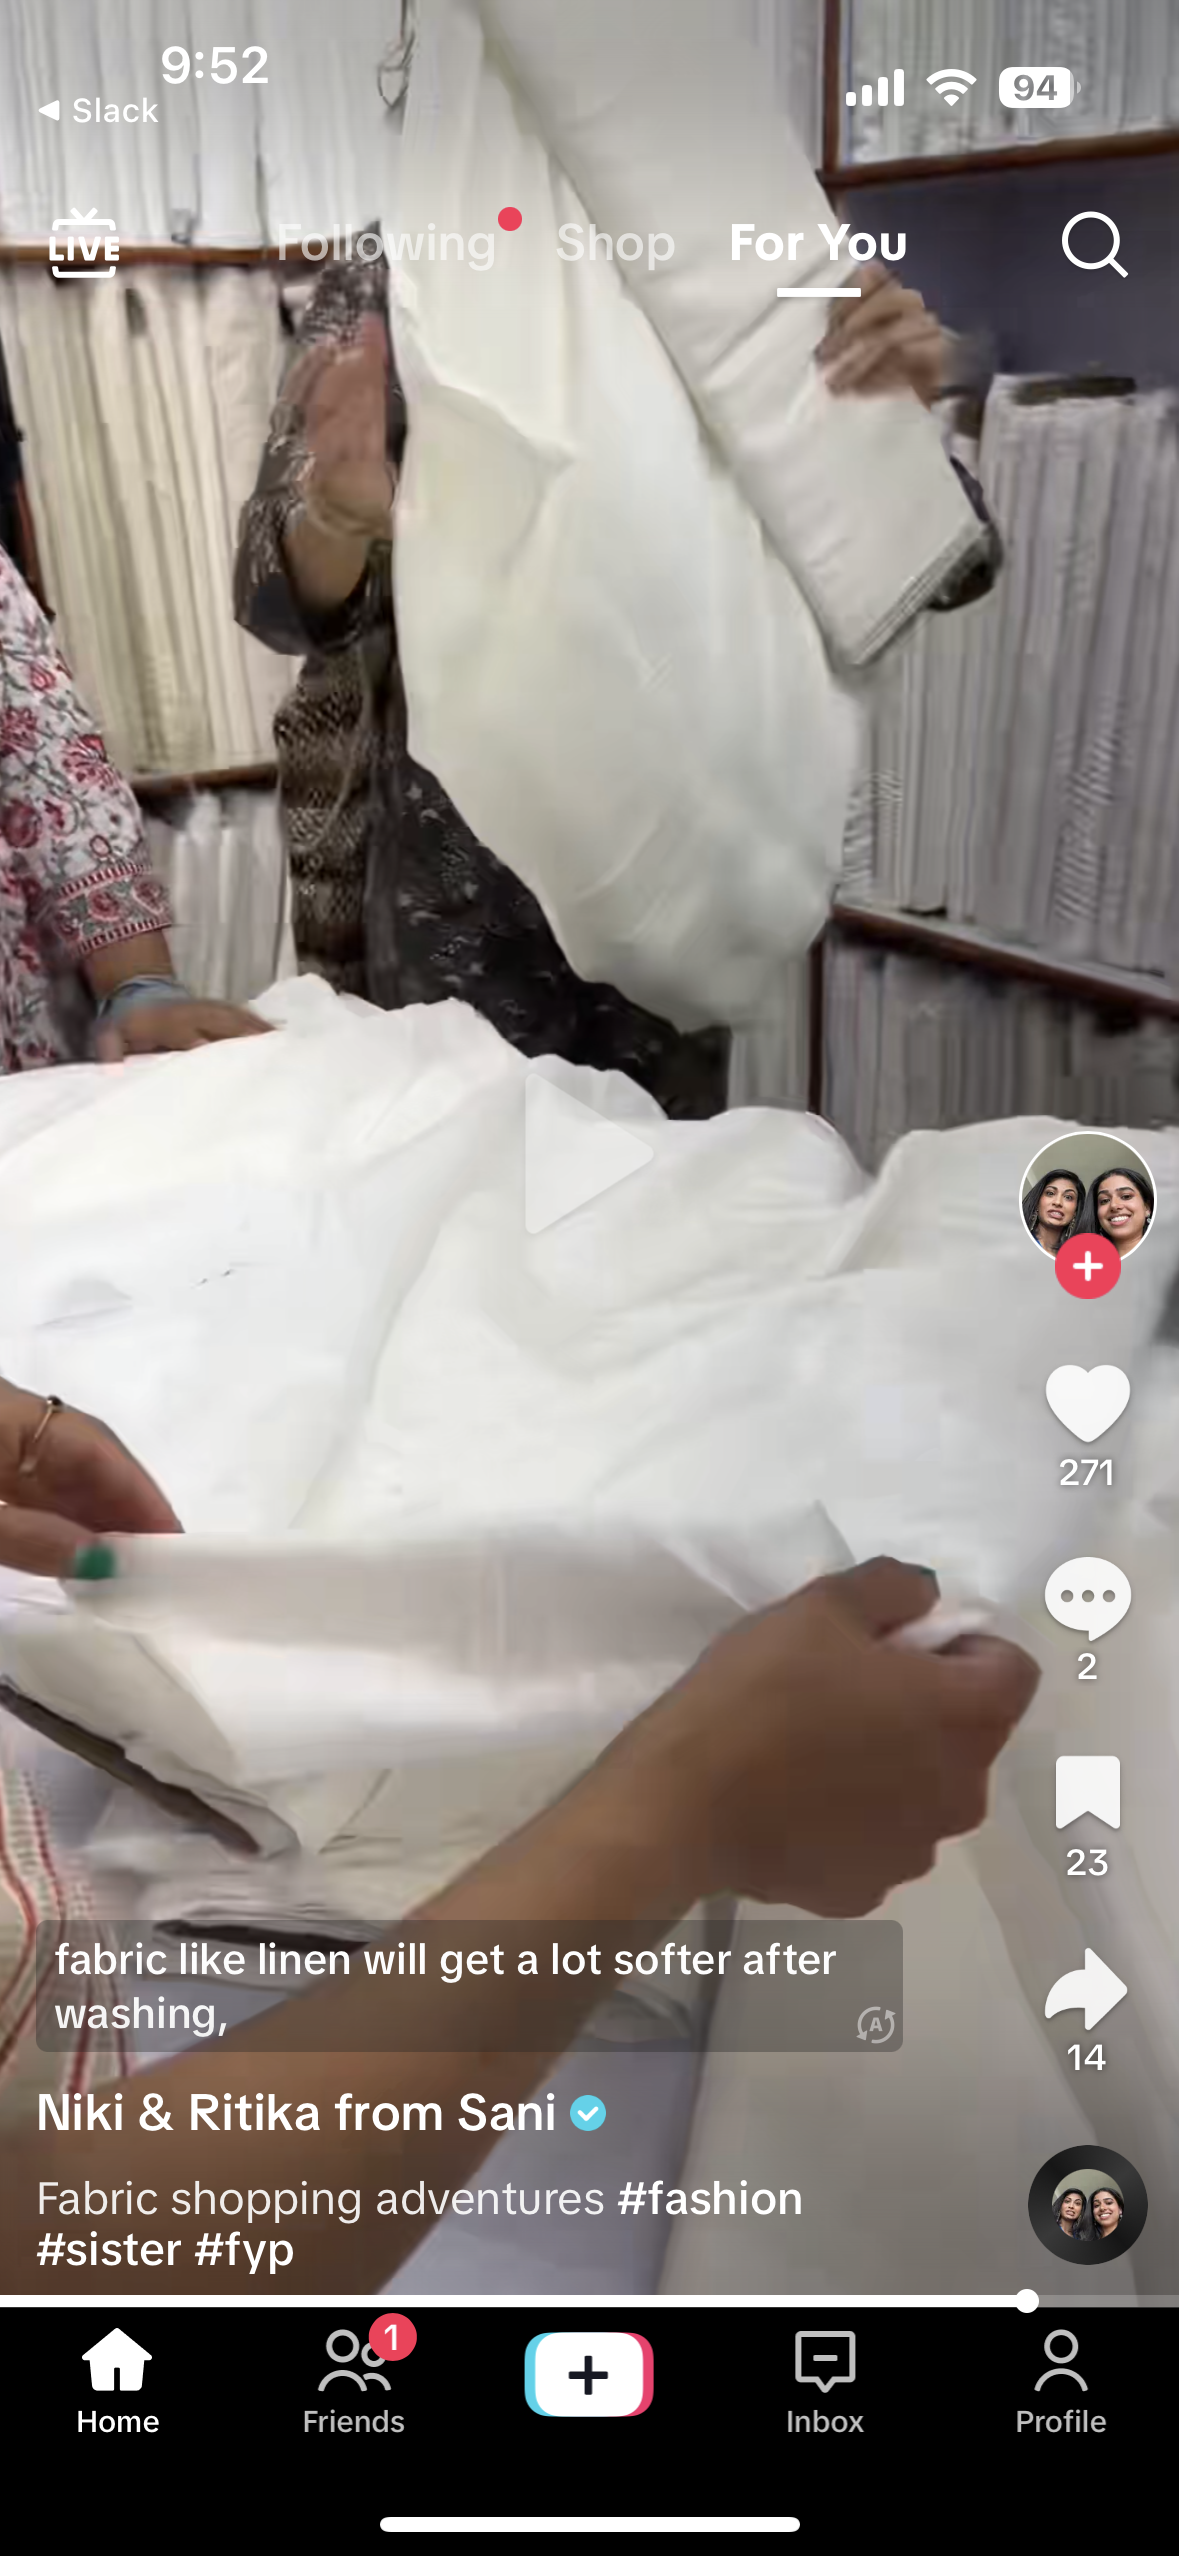 A TikTok video from the clothing brand Sani showcasing the owners' fabric shopping adventure.